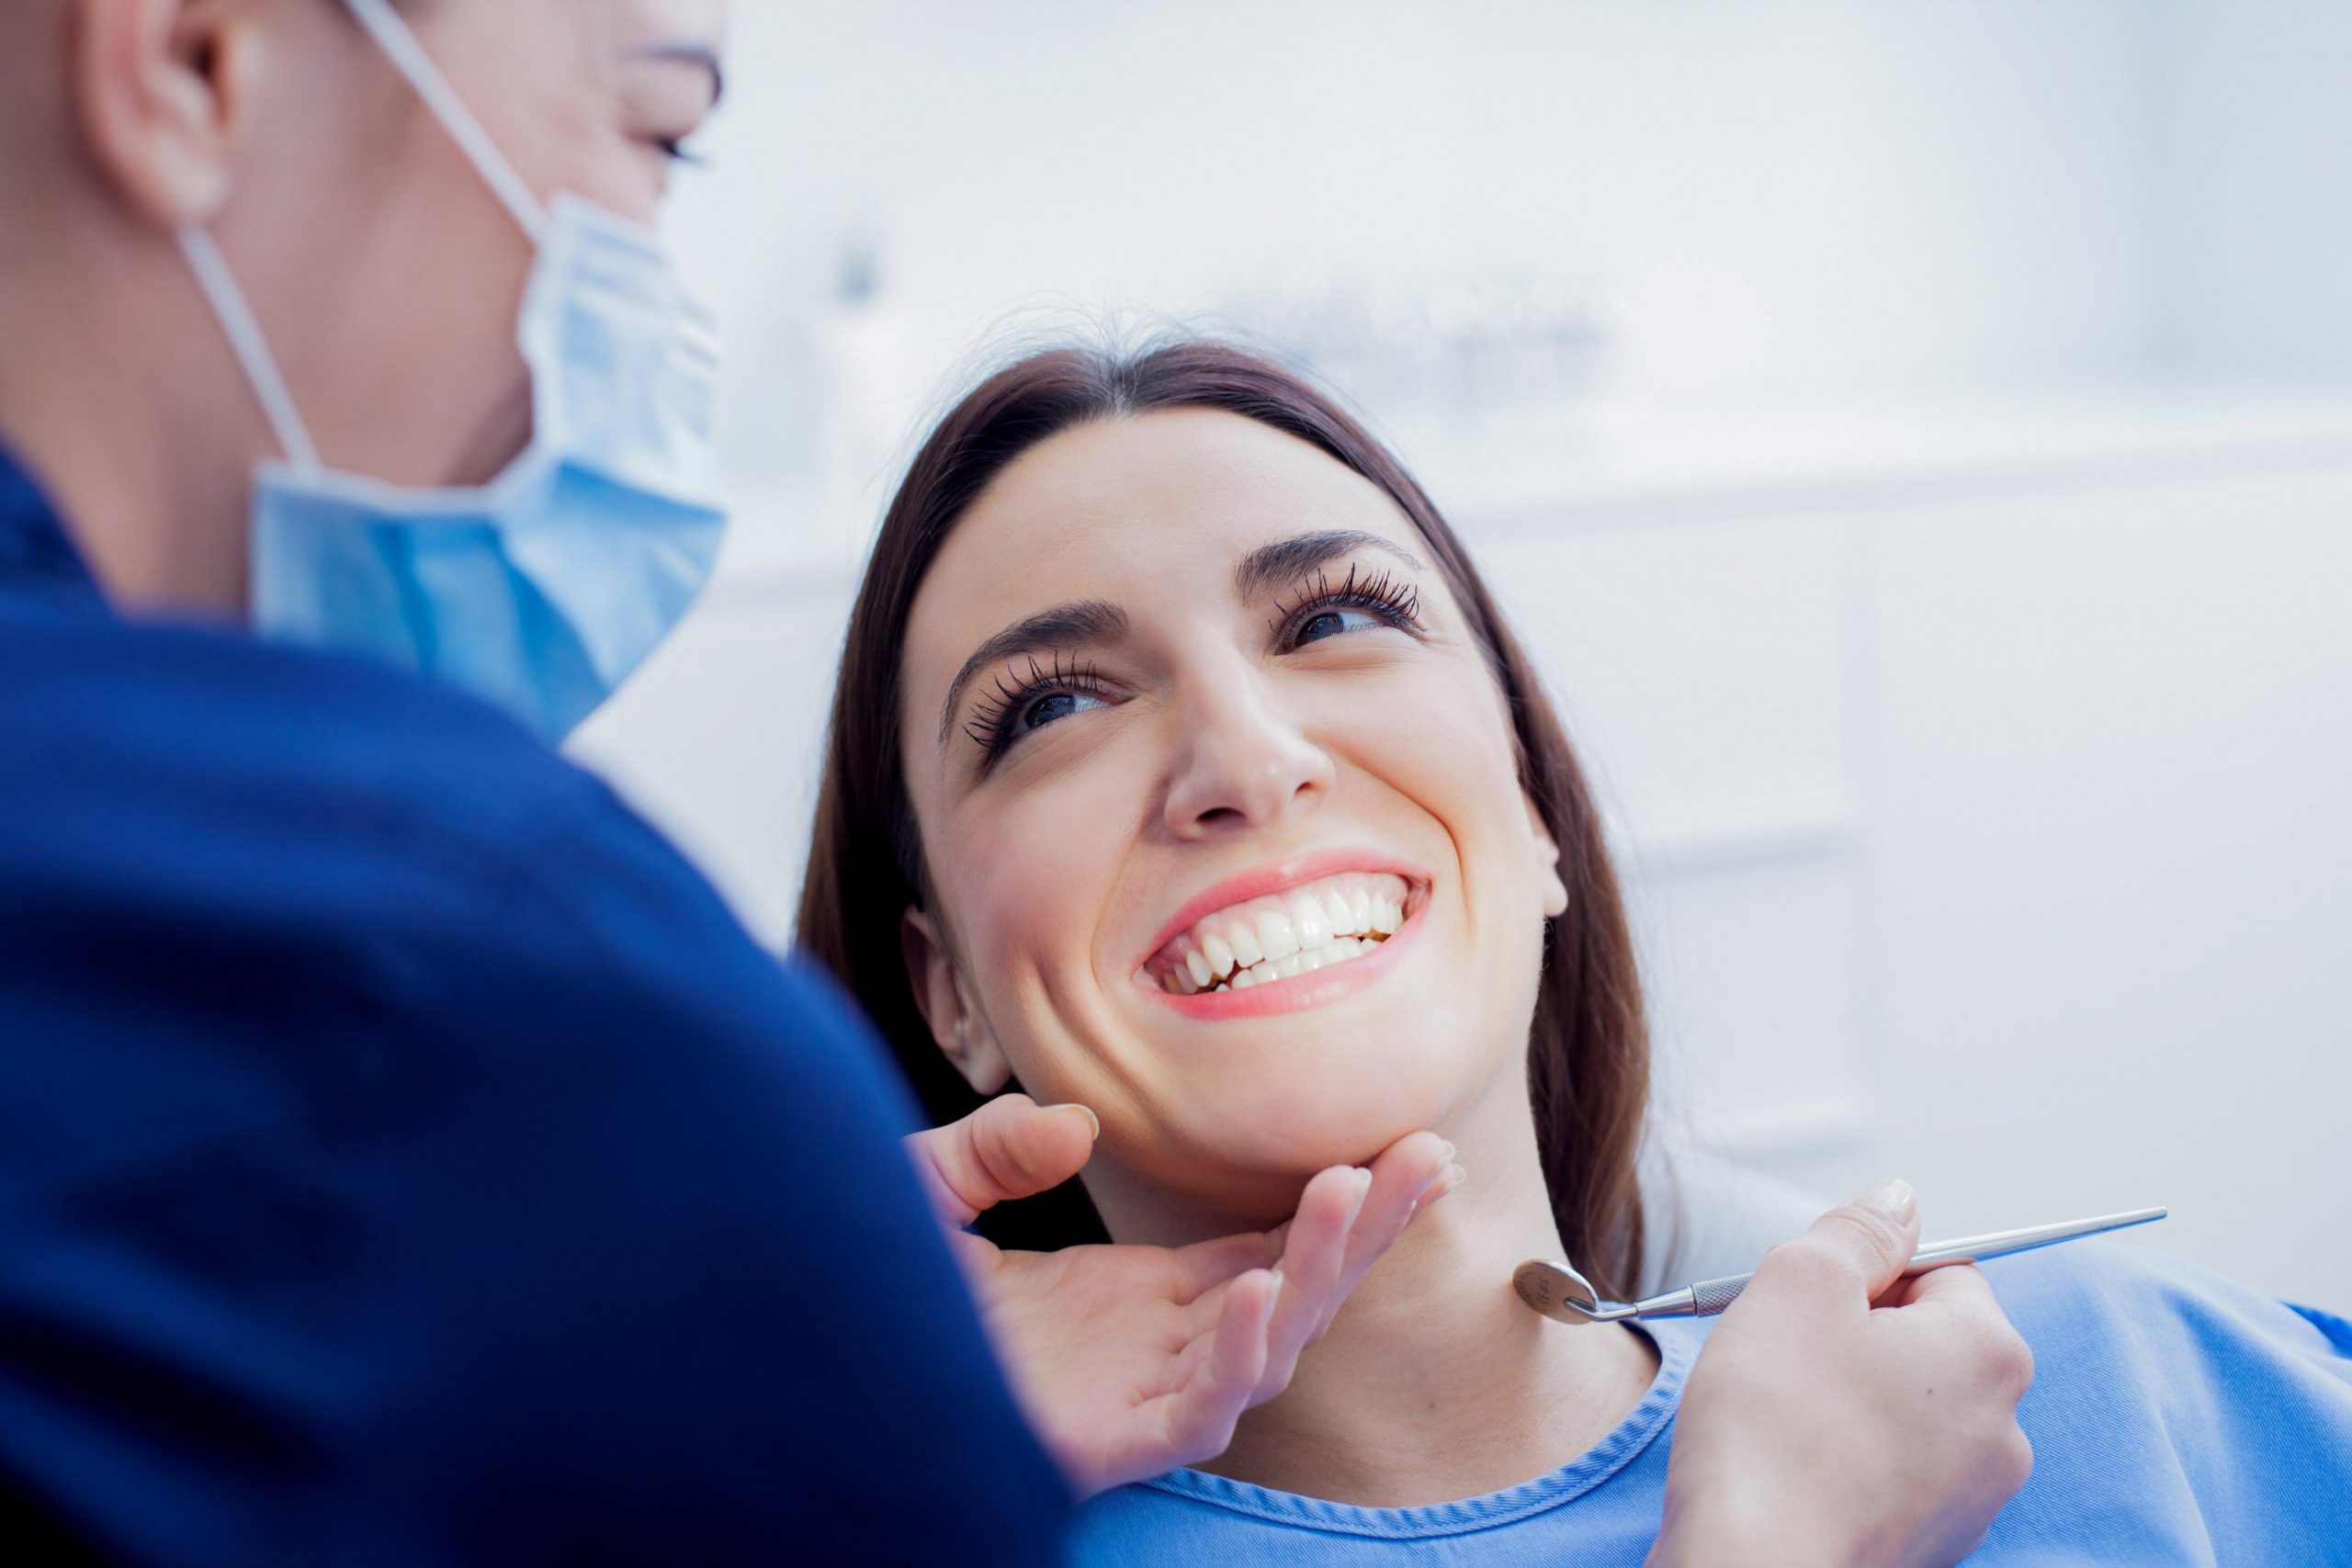 The steps and stages of the dental implant procedure